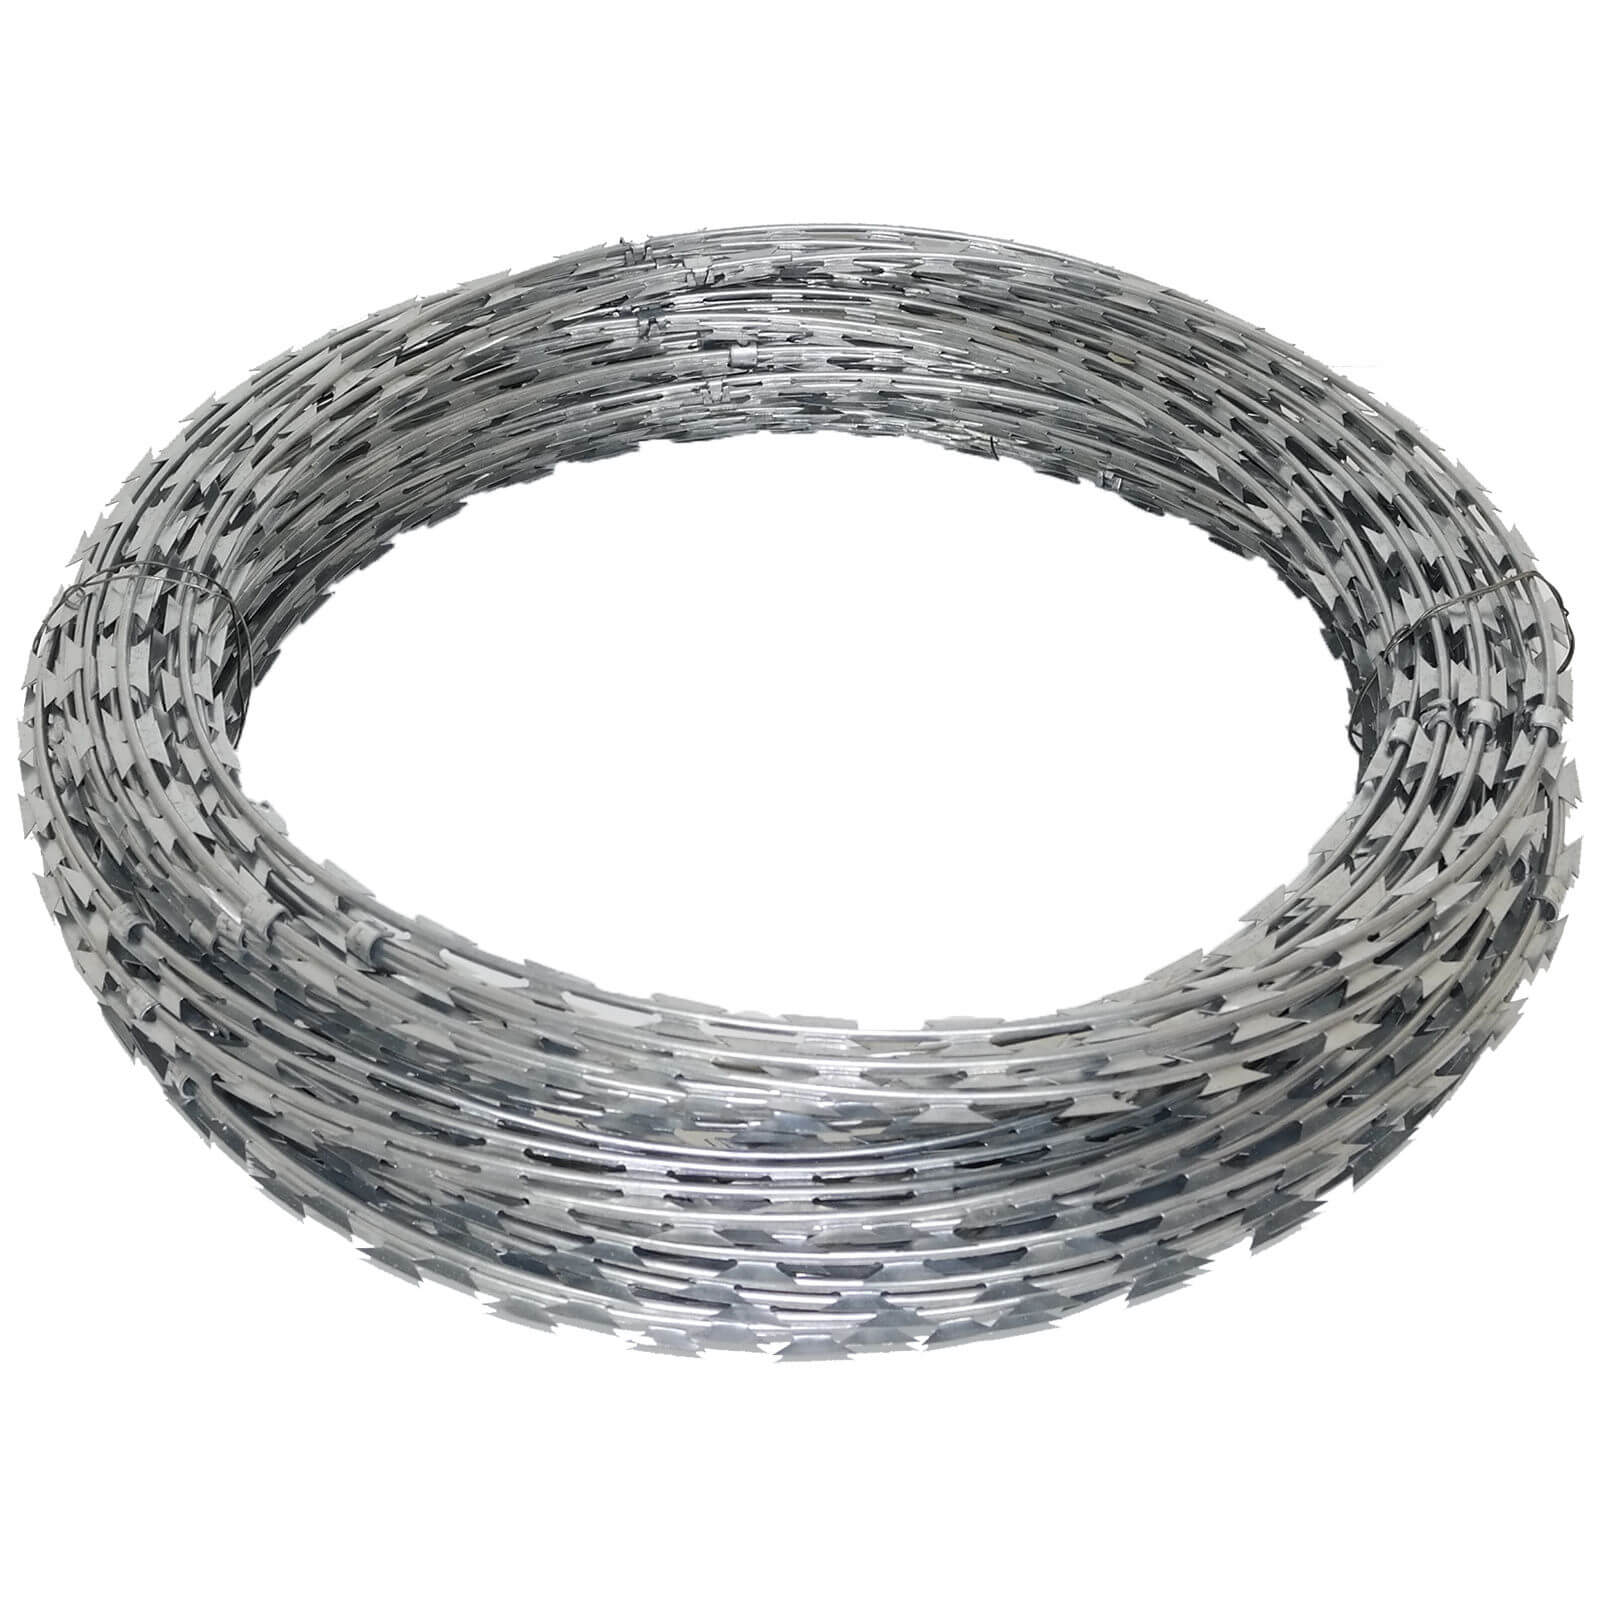 Razor wire fencing: Protecting your assets